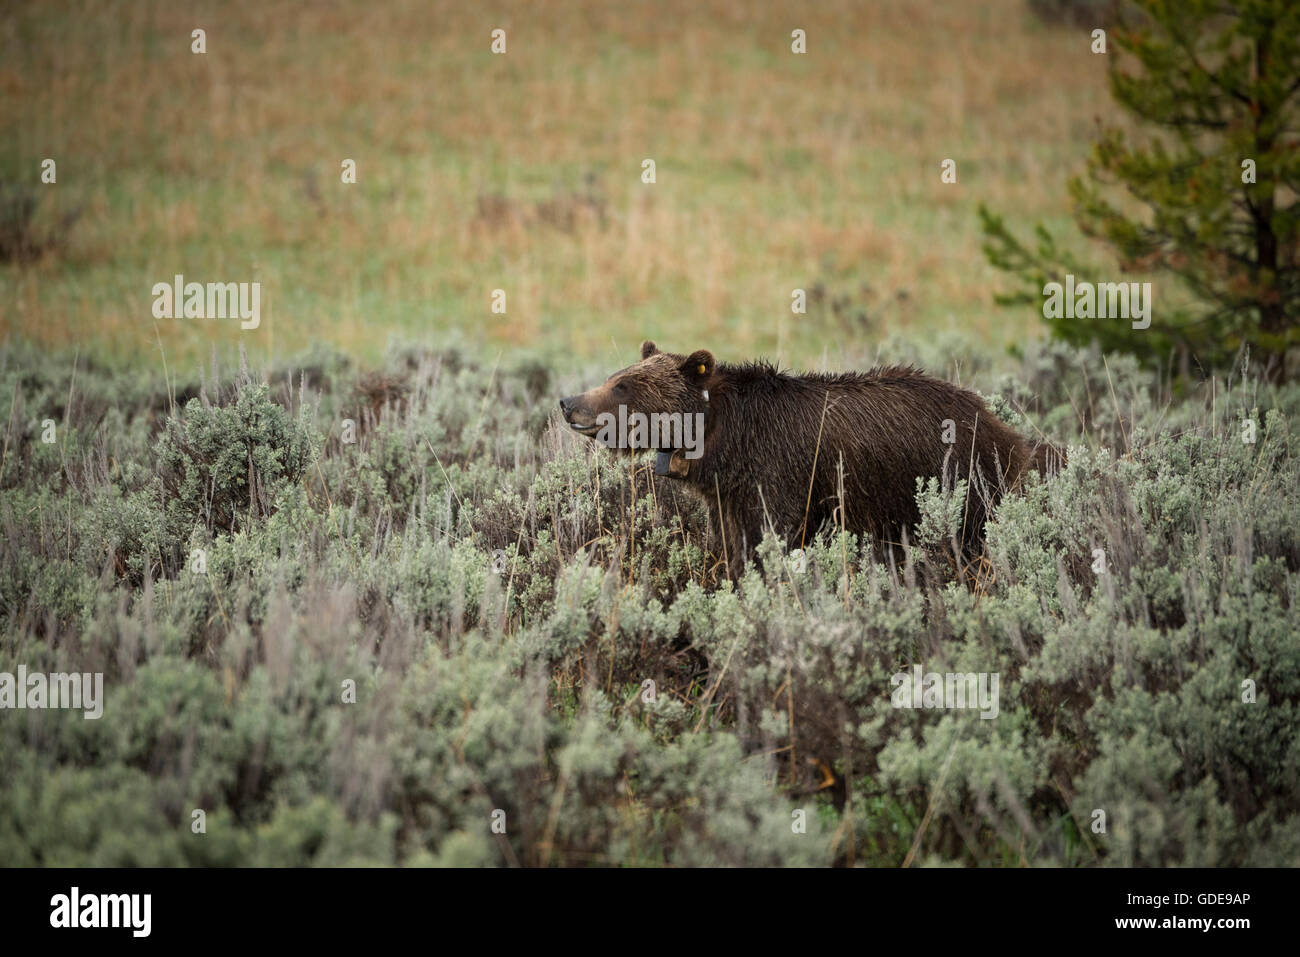 USA,Wyoming,Grand Teton,National Park,Grizzly bear wearing tracking collar Stock Photo